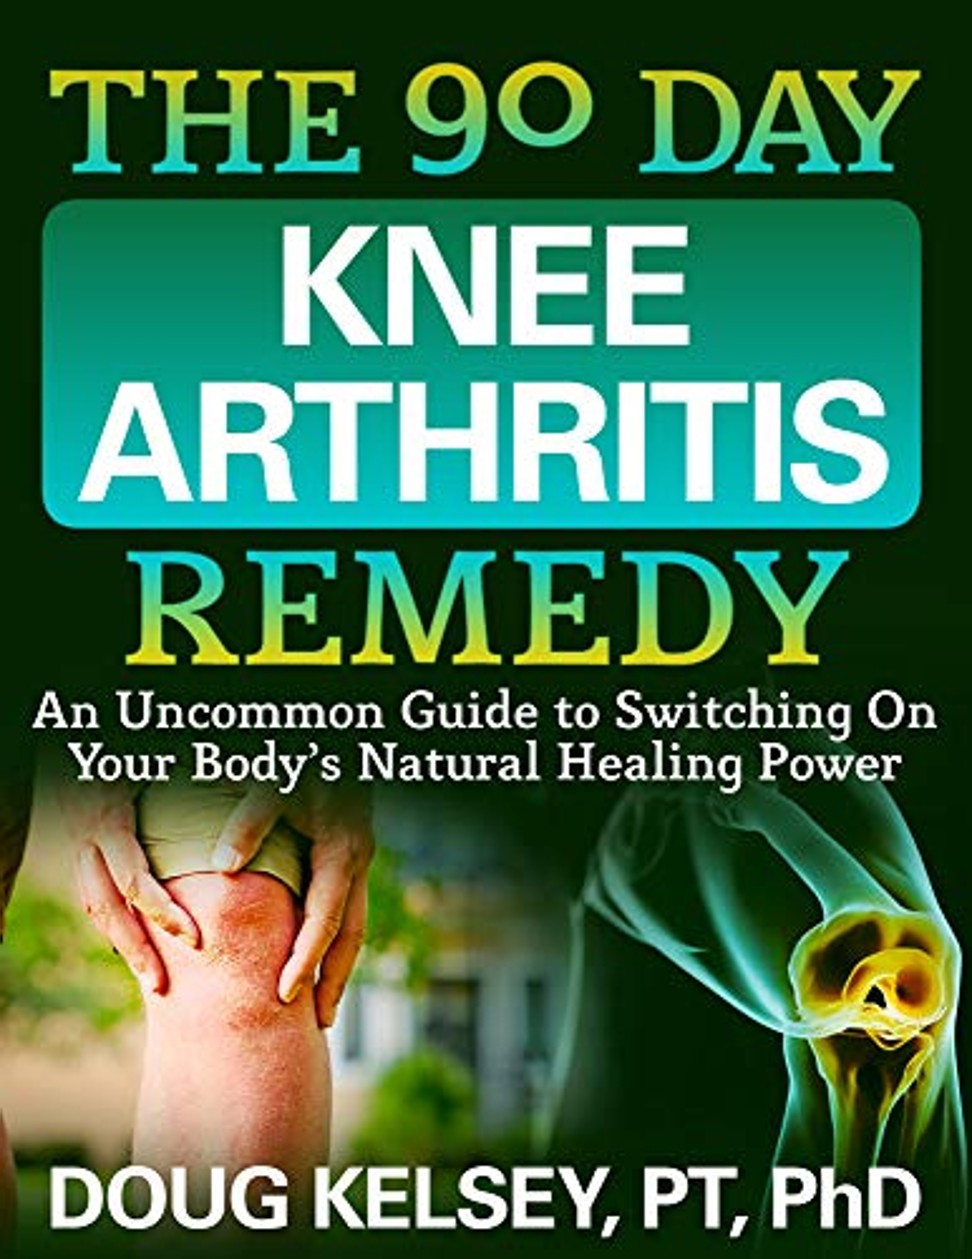 The 90 Day Knee Arthritis Remedy by Doug Kelsey. Photo: Handout